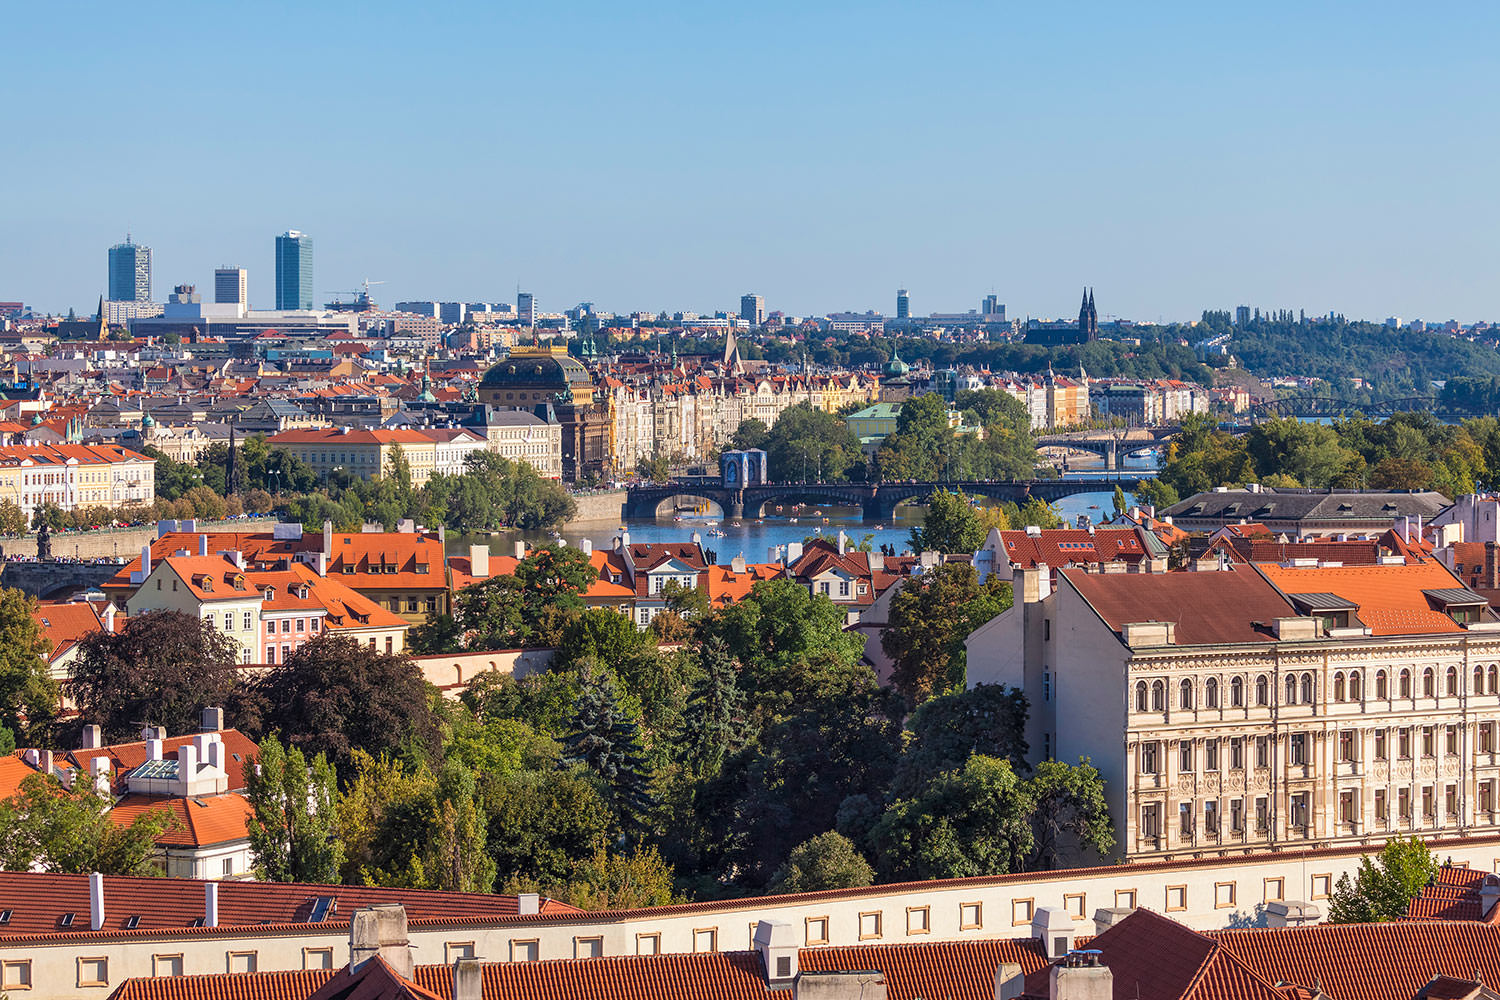 The view from Opyš Hill towards the Vltava River in Prague